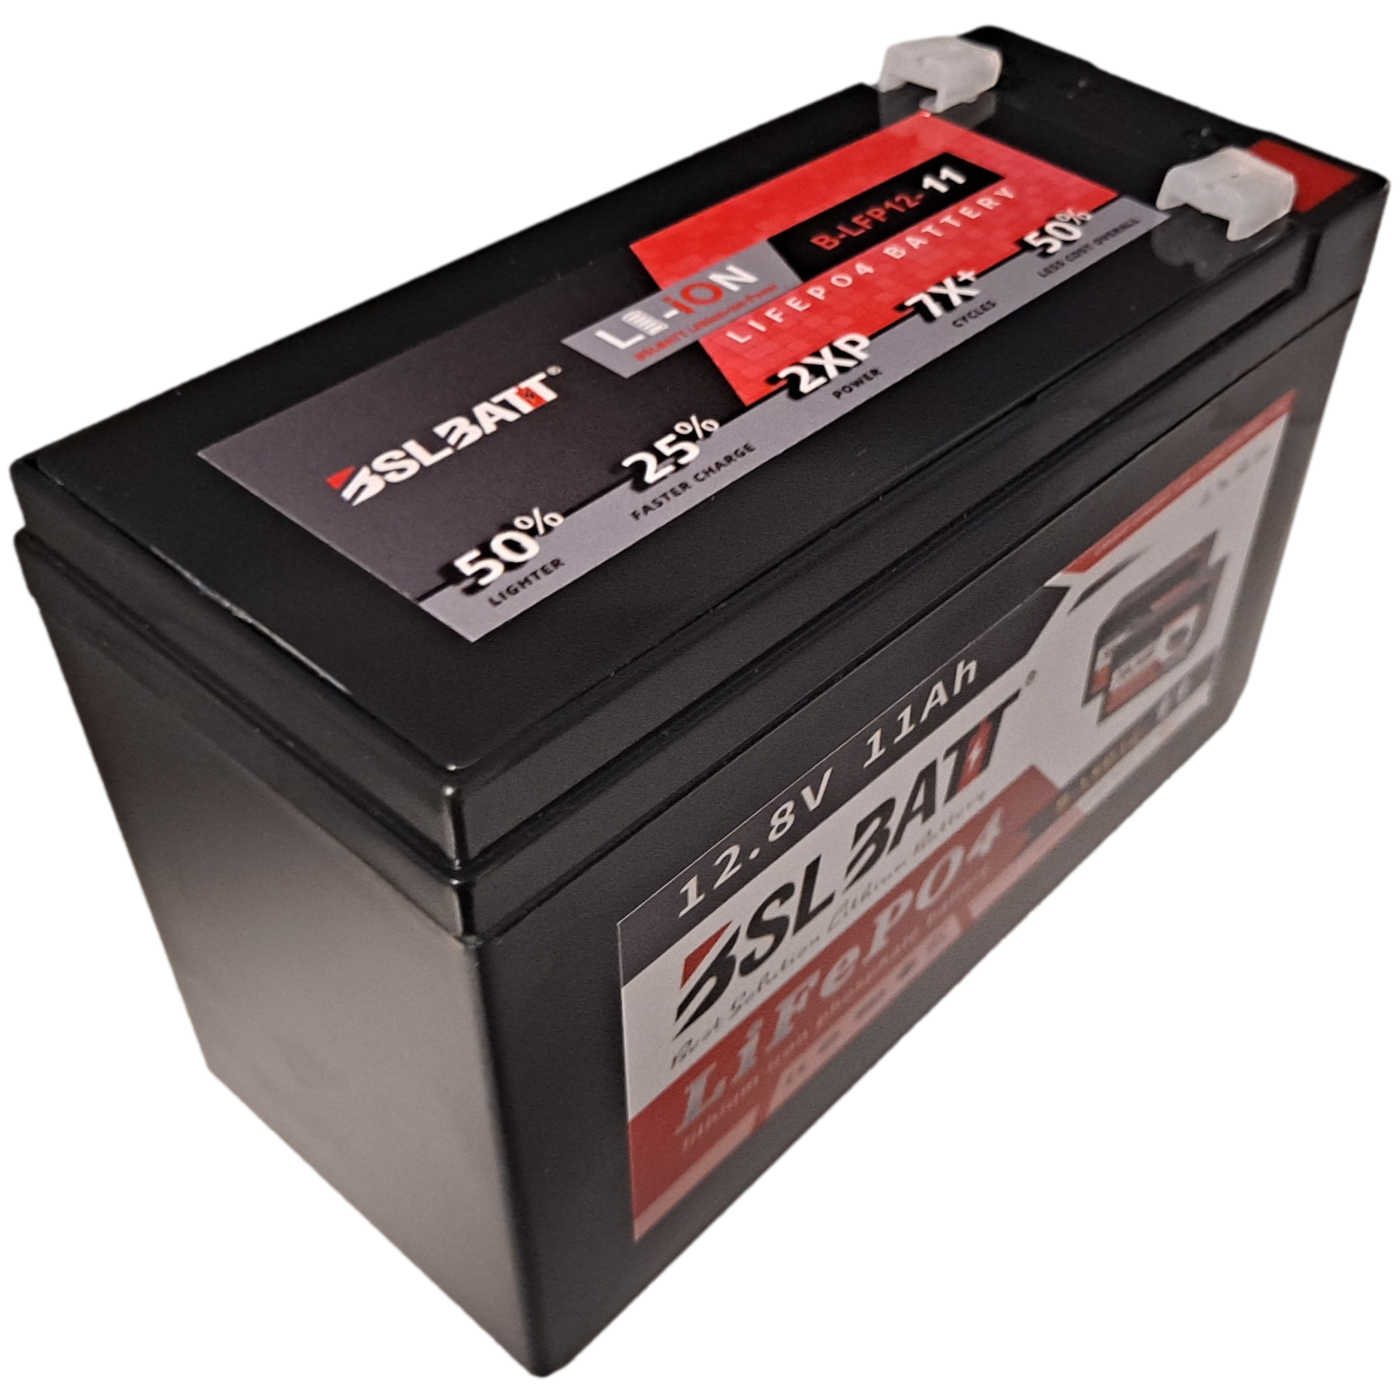 12.8v 11ah 140.8Wh Lifepo4 Battery with BMS - 12v